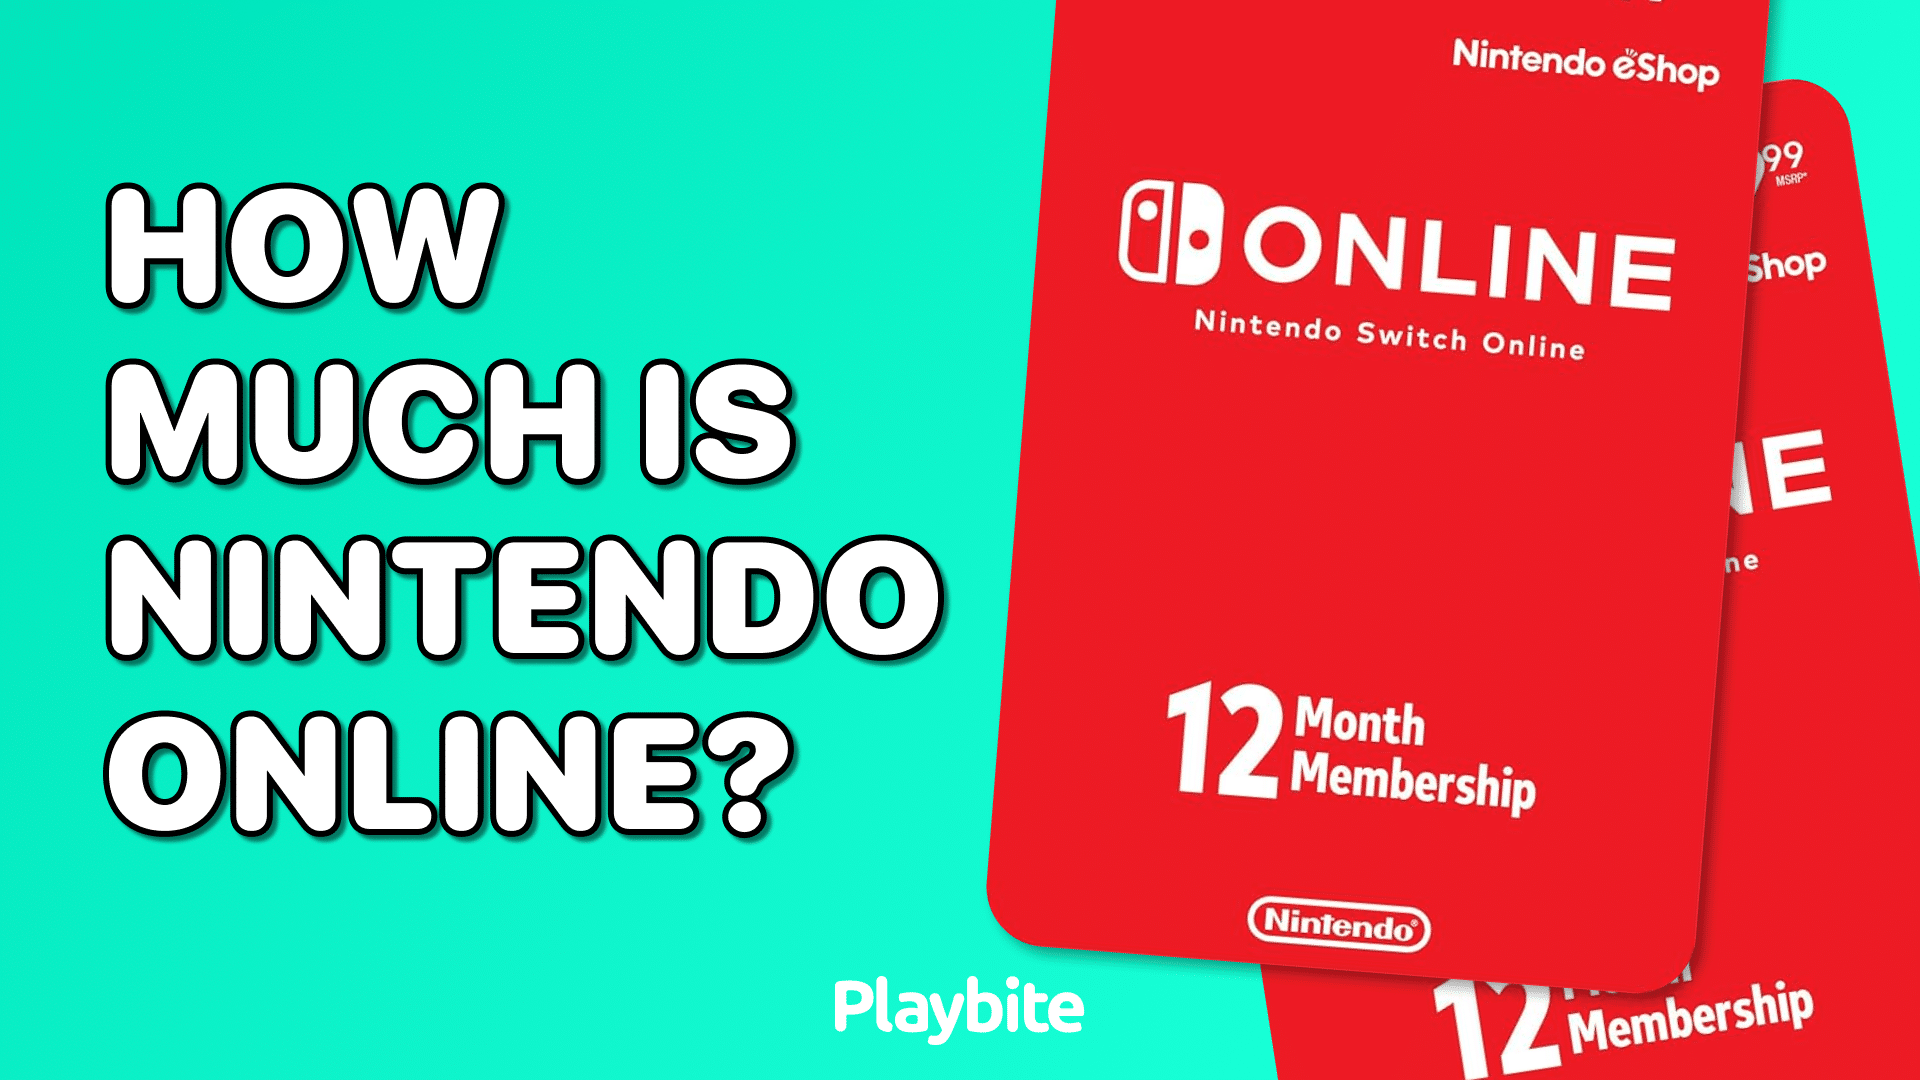 How Much Is The Nintendo Switch Online Subscription?